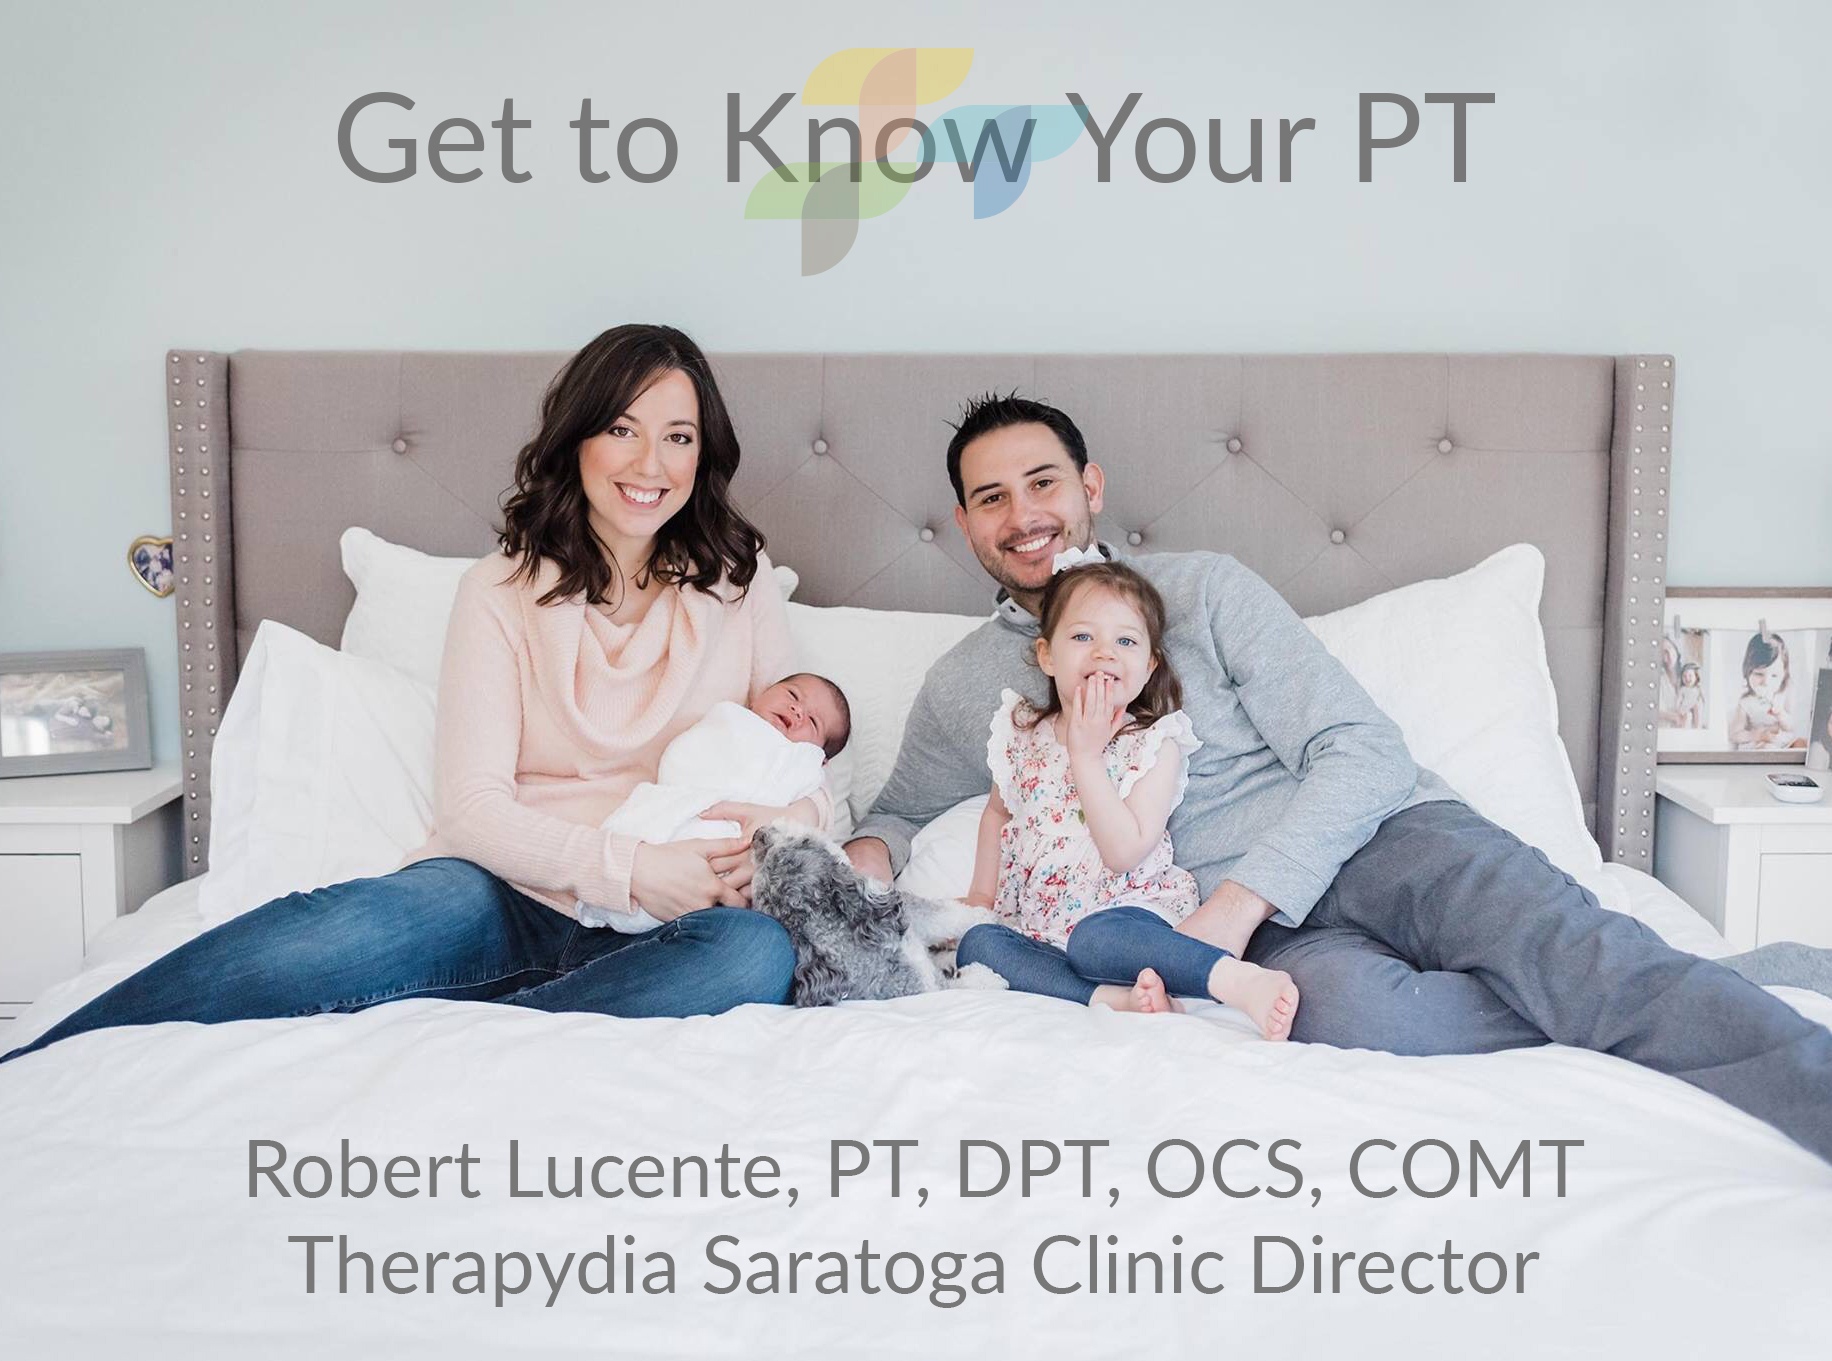 Get to Know Your PT – Robert Lucente, Therapydia Saratoga